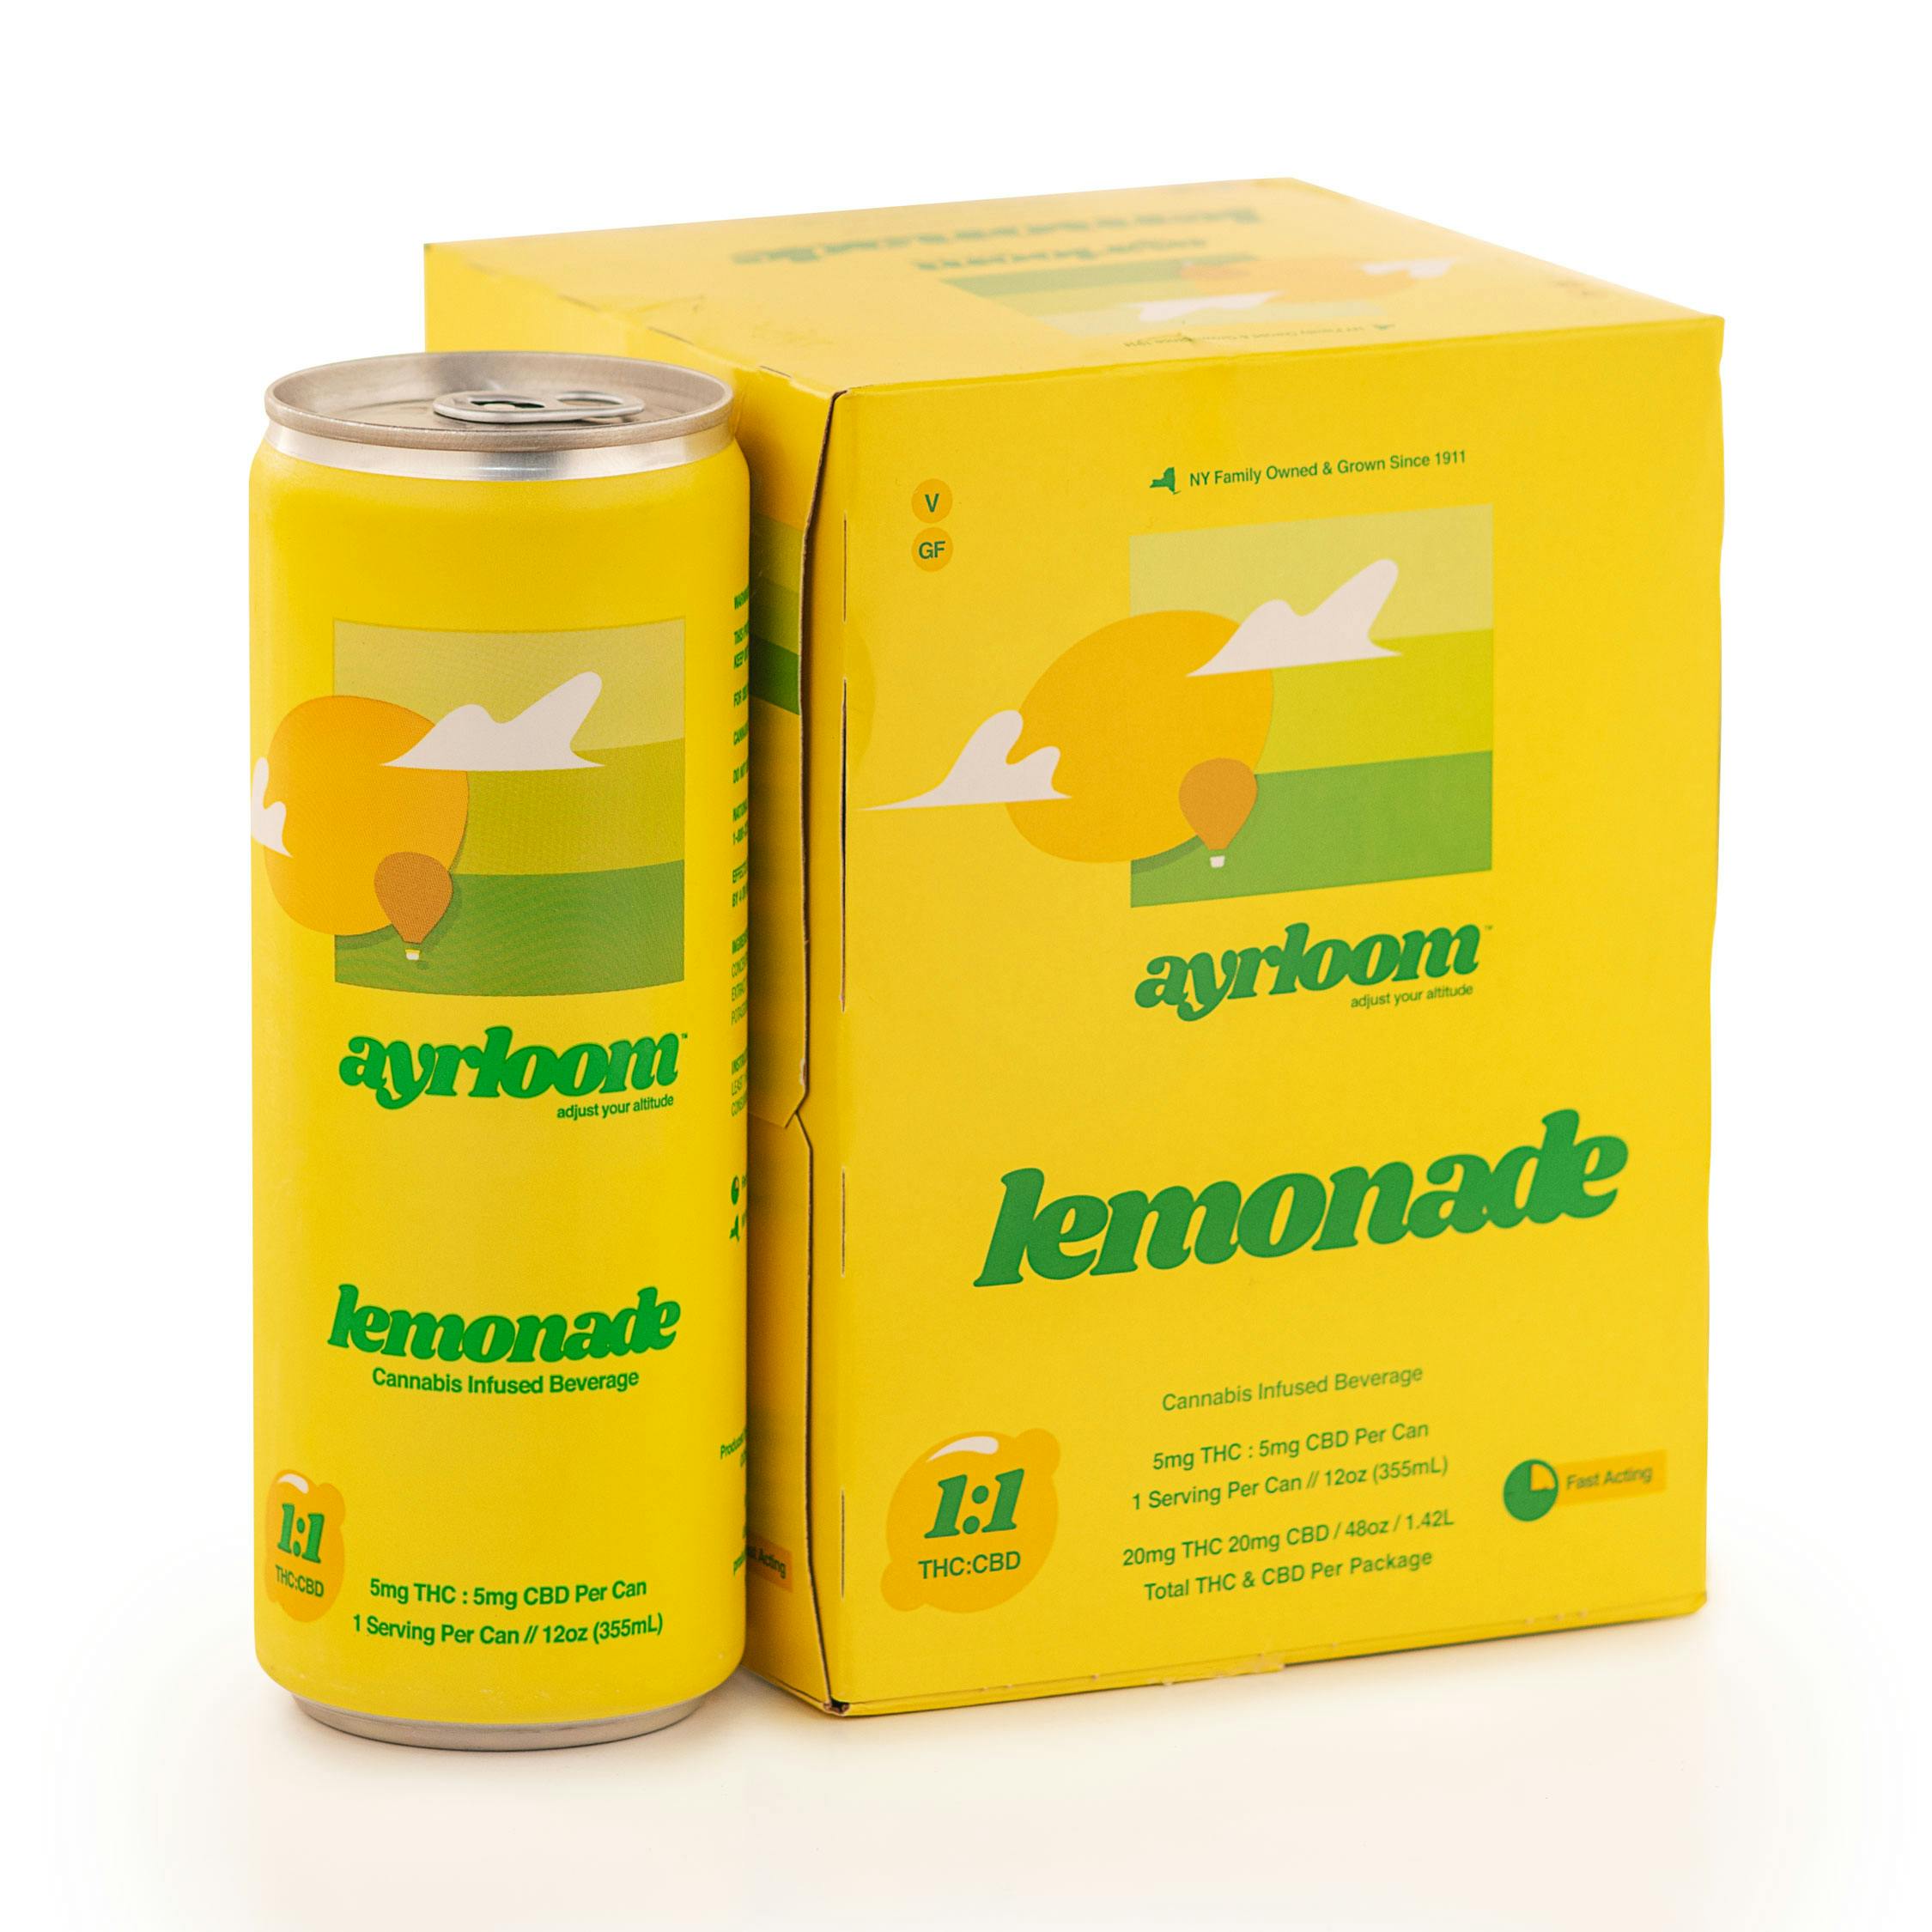 Lemonade 1:1 Infused Beverage • 4 Pack - ayrloom | Treehouse Cannabis - Weed delivery for New York